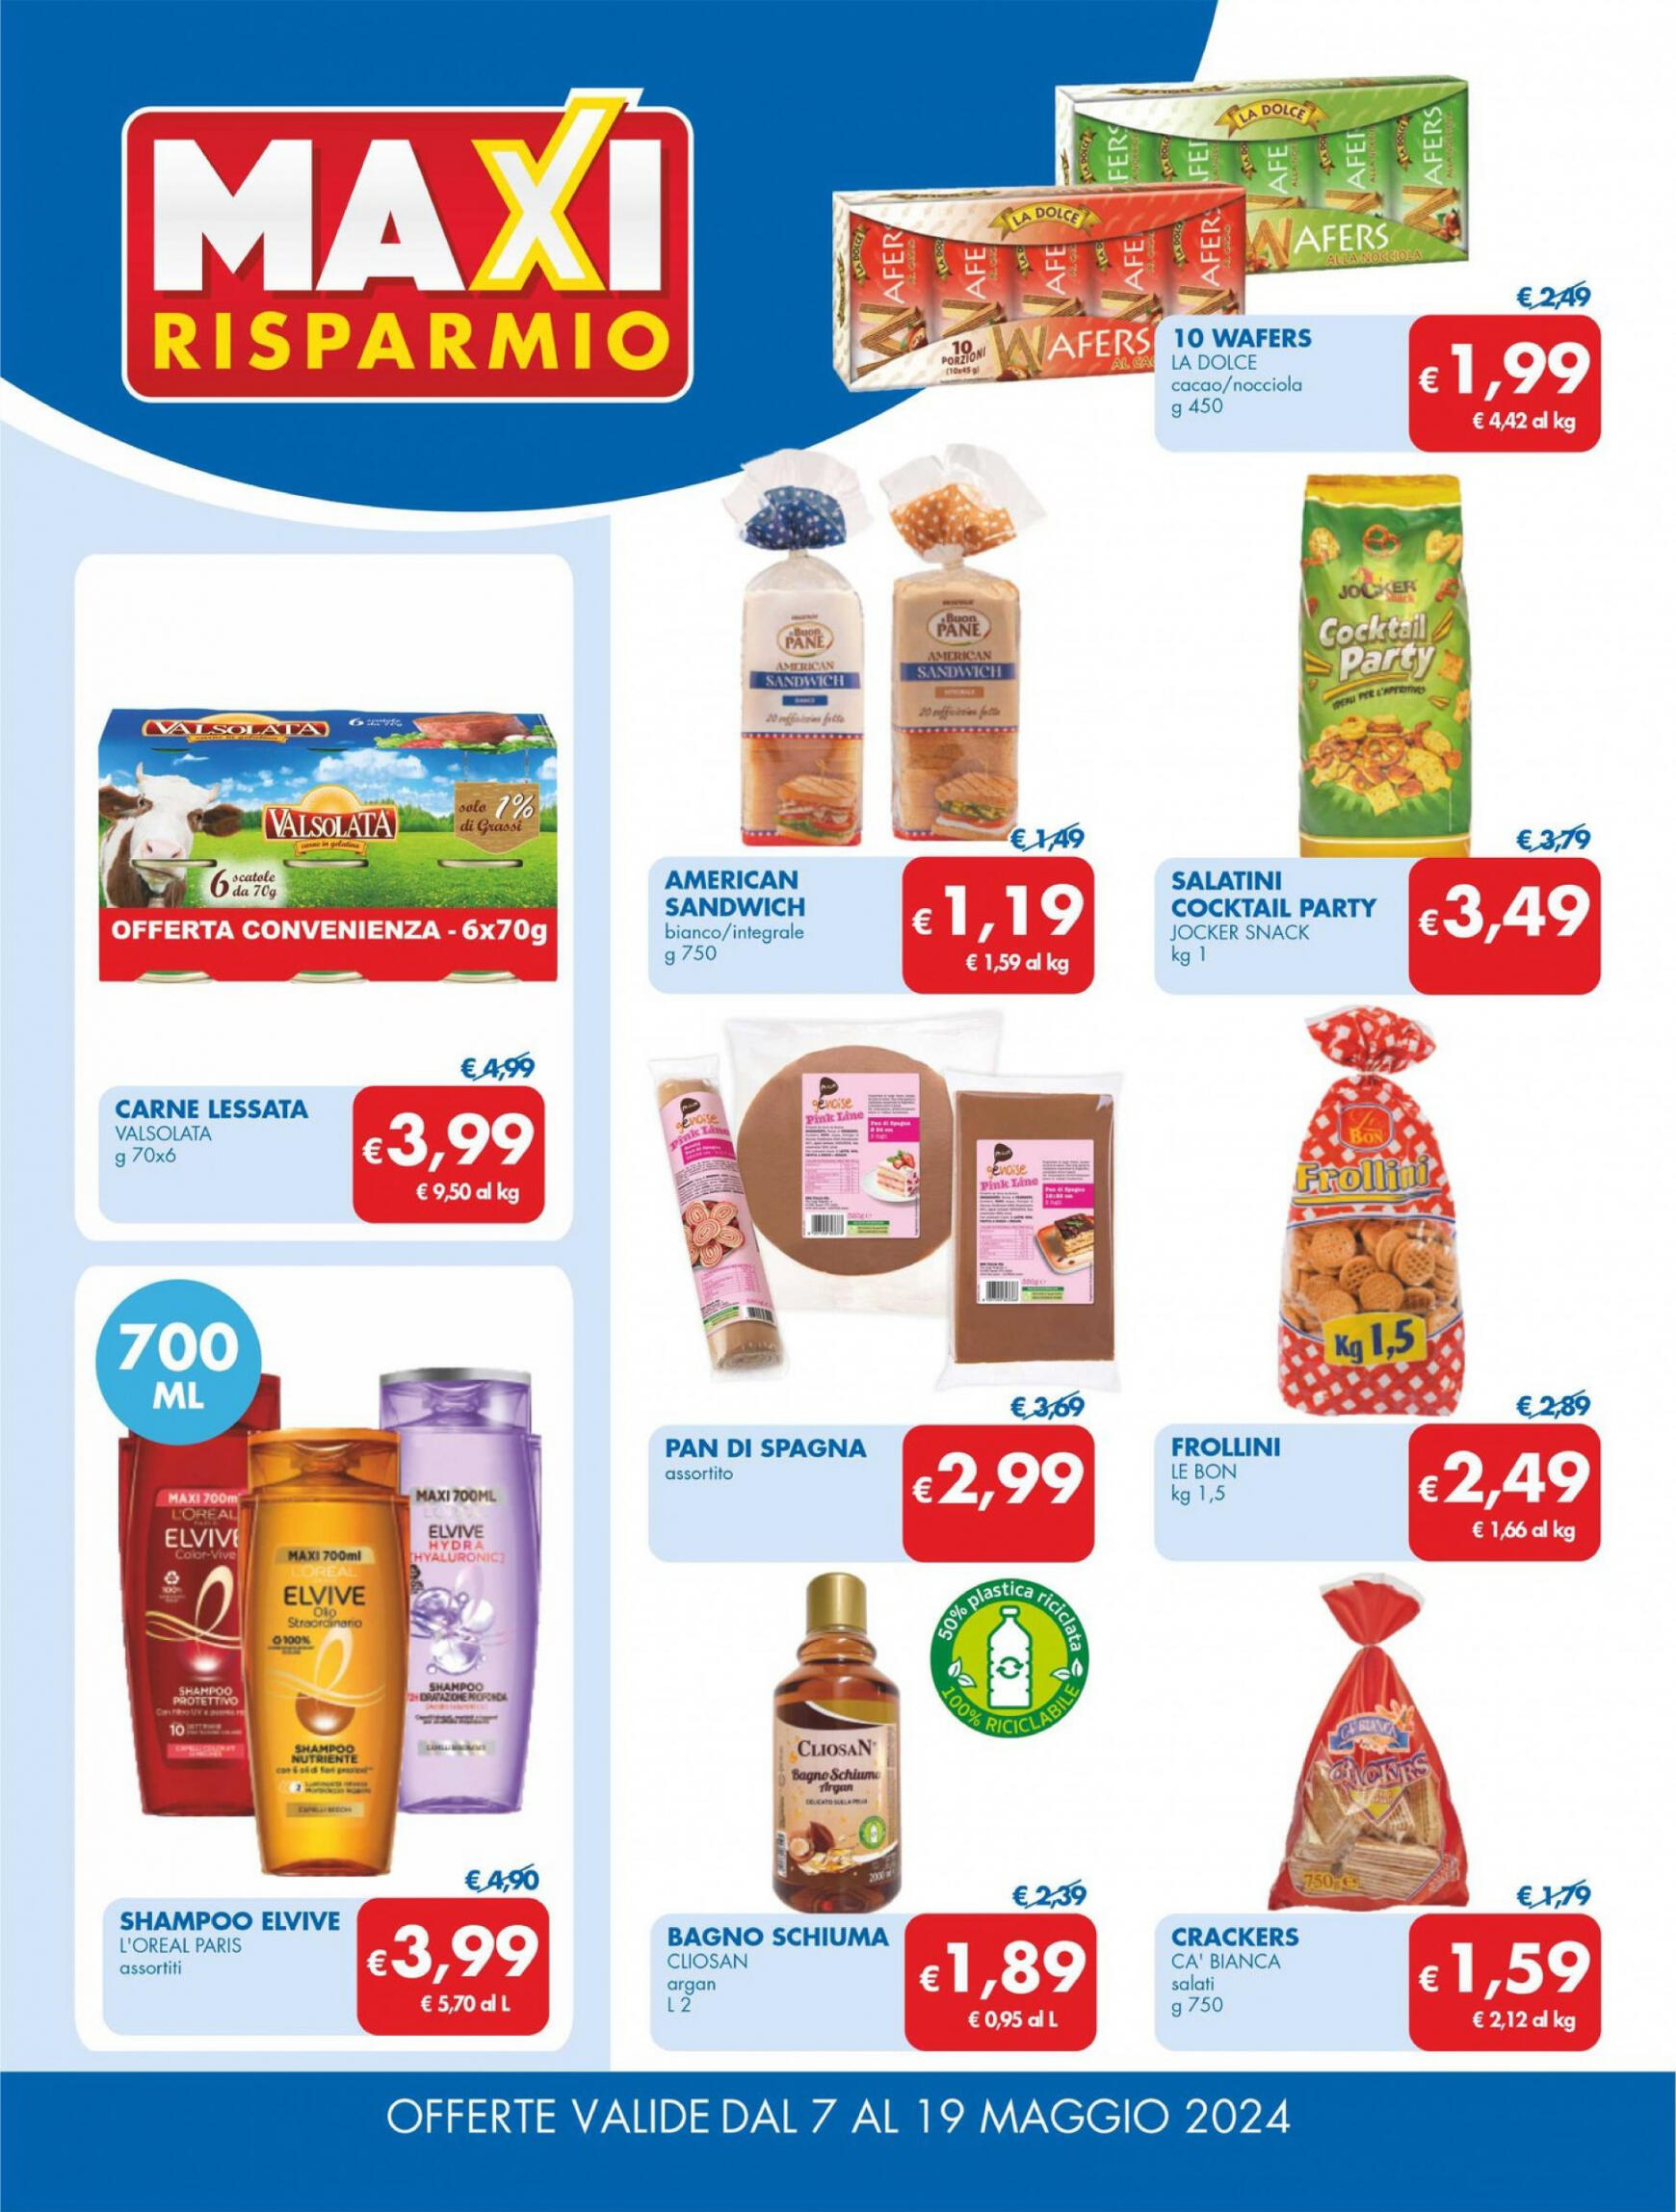 md-discount - Nuovo volantino MD - MD Discount 07.05. - 19.05. - page: 5